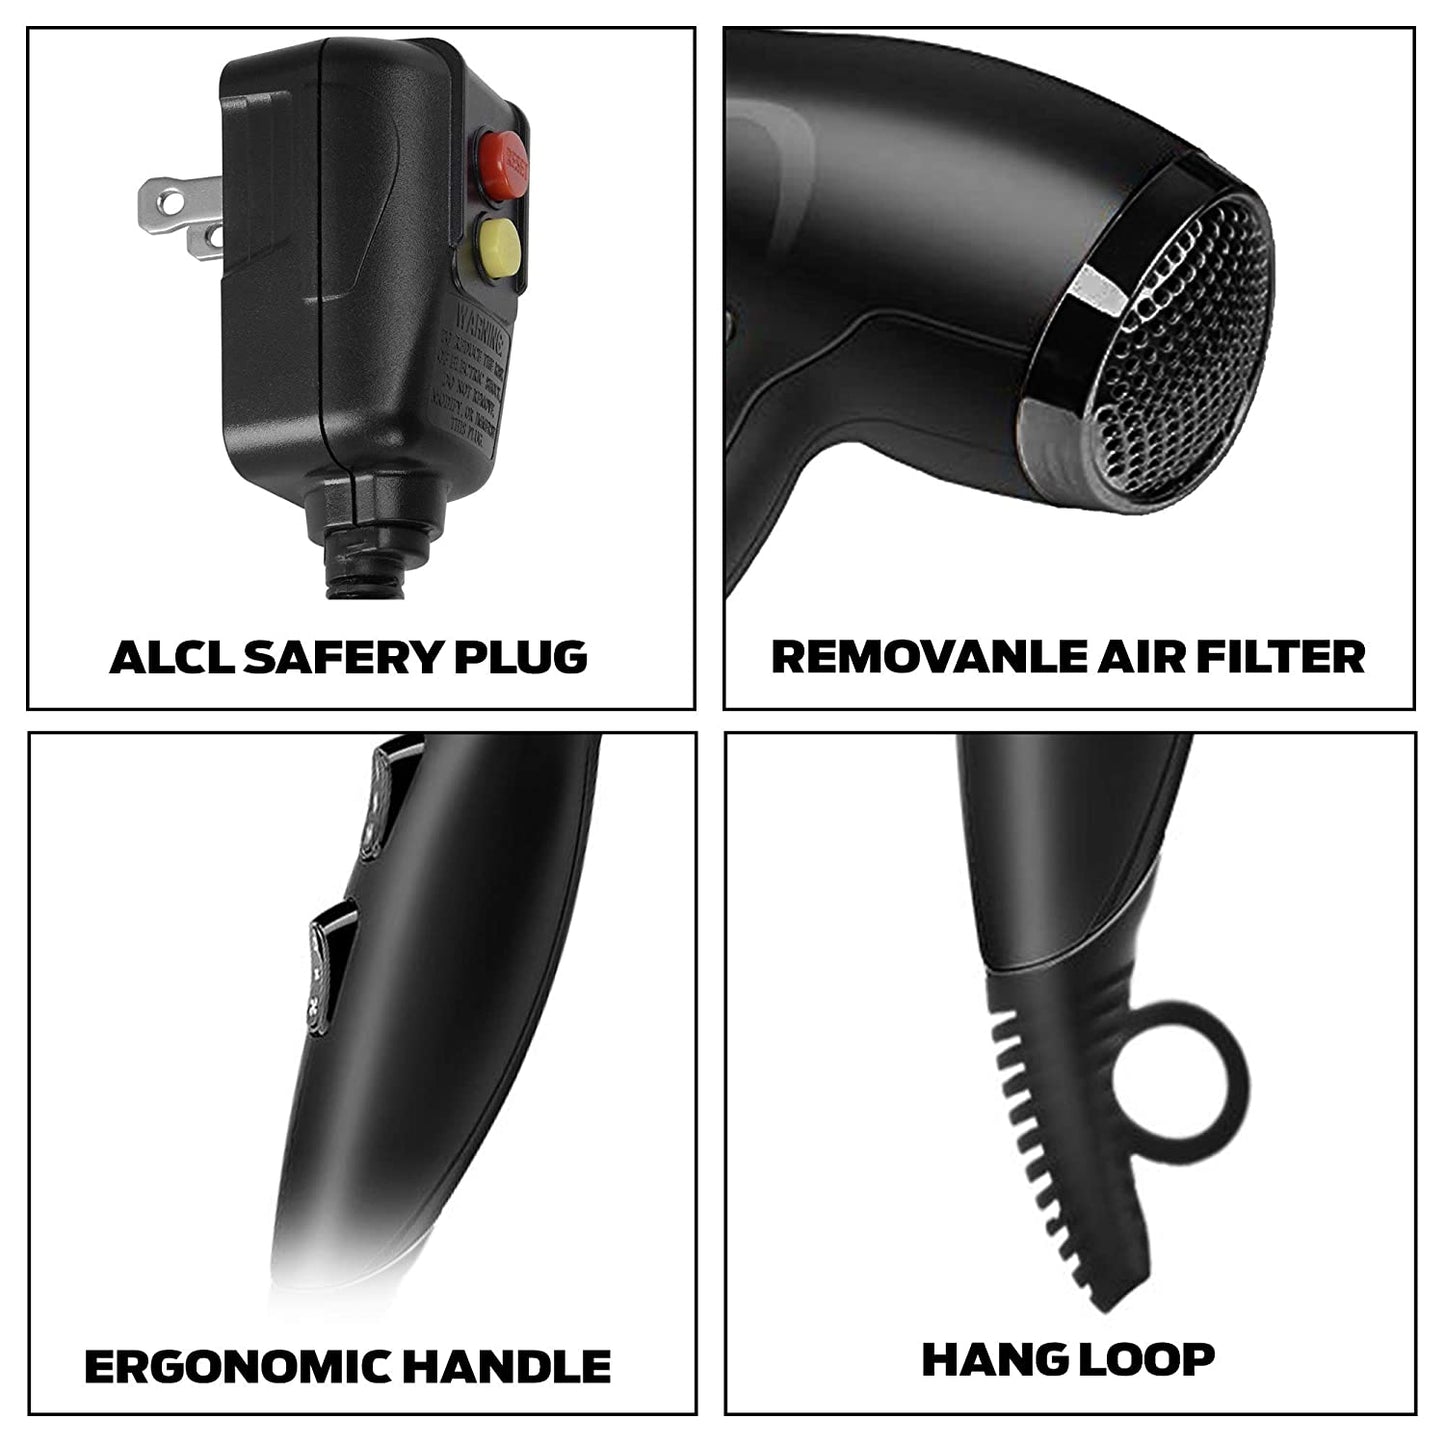 AIKO PRO 1875W Negative Ionic Professional Fast Dryer Hair Dryer, Lightweight Salon Performance Blow Dryer, Blow Hot or Cool Air, with Concentrator, 2 Speed and 3 Heat Settings, ETL Certified